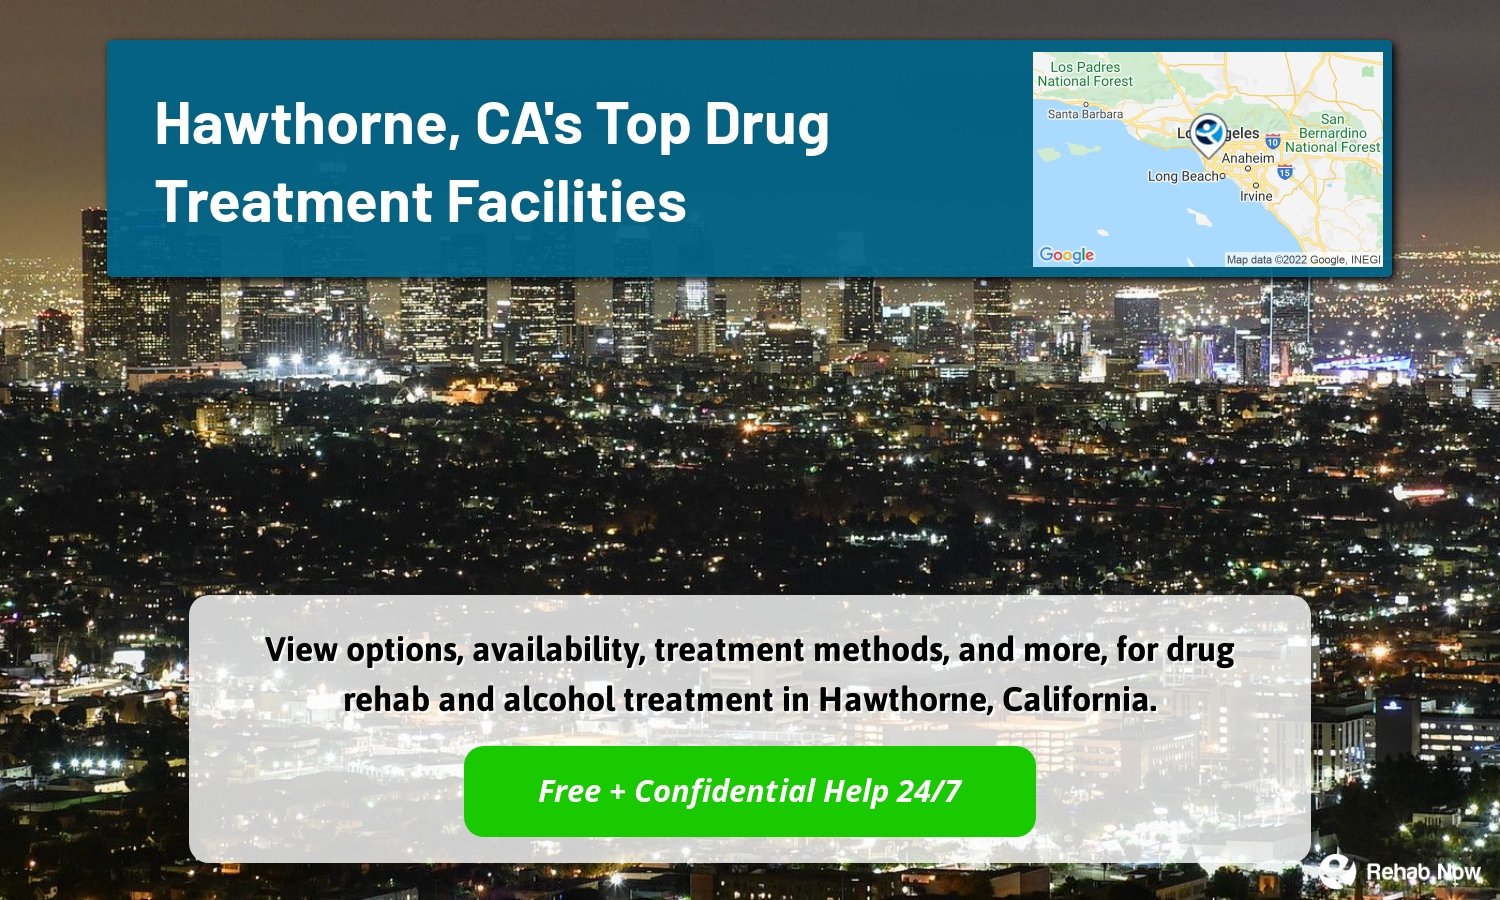 View options, availability, treatment methods, and more, for drug rehab and alcohol treatment in Hawthorne, California.